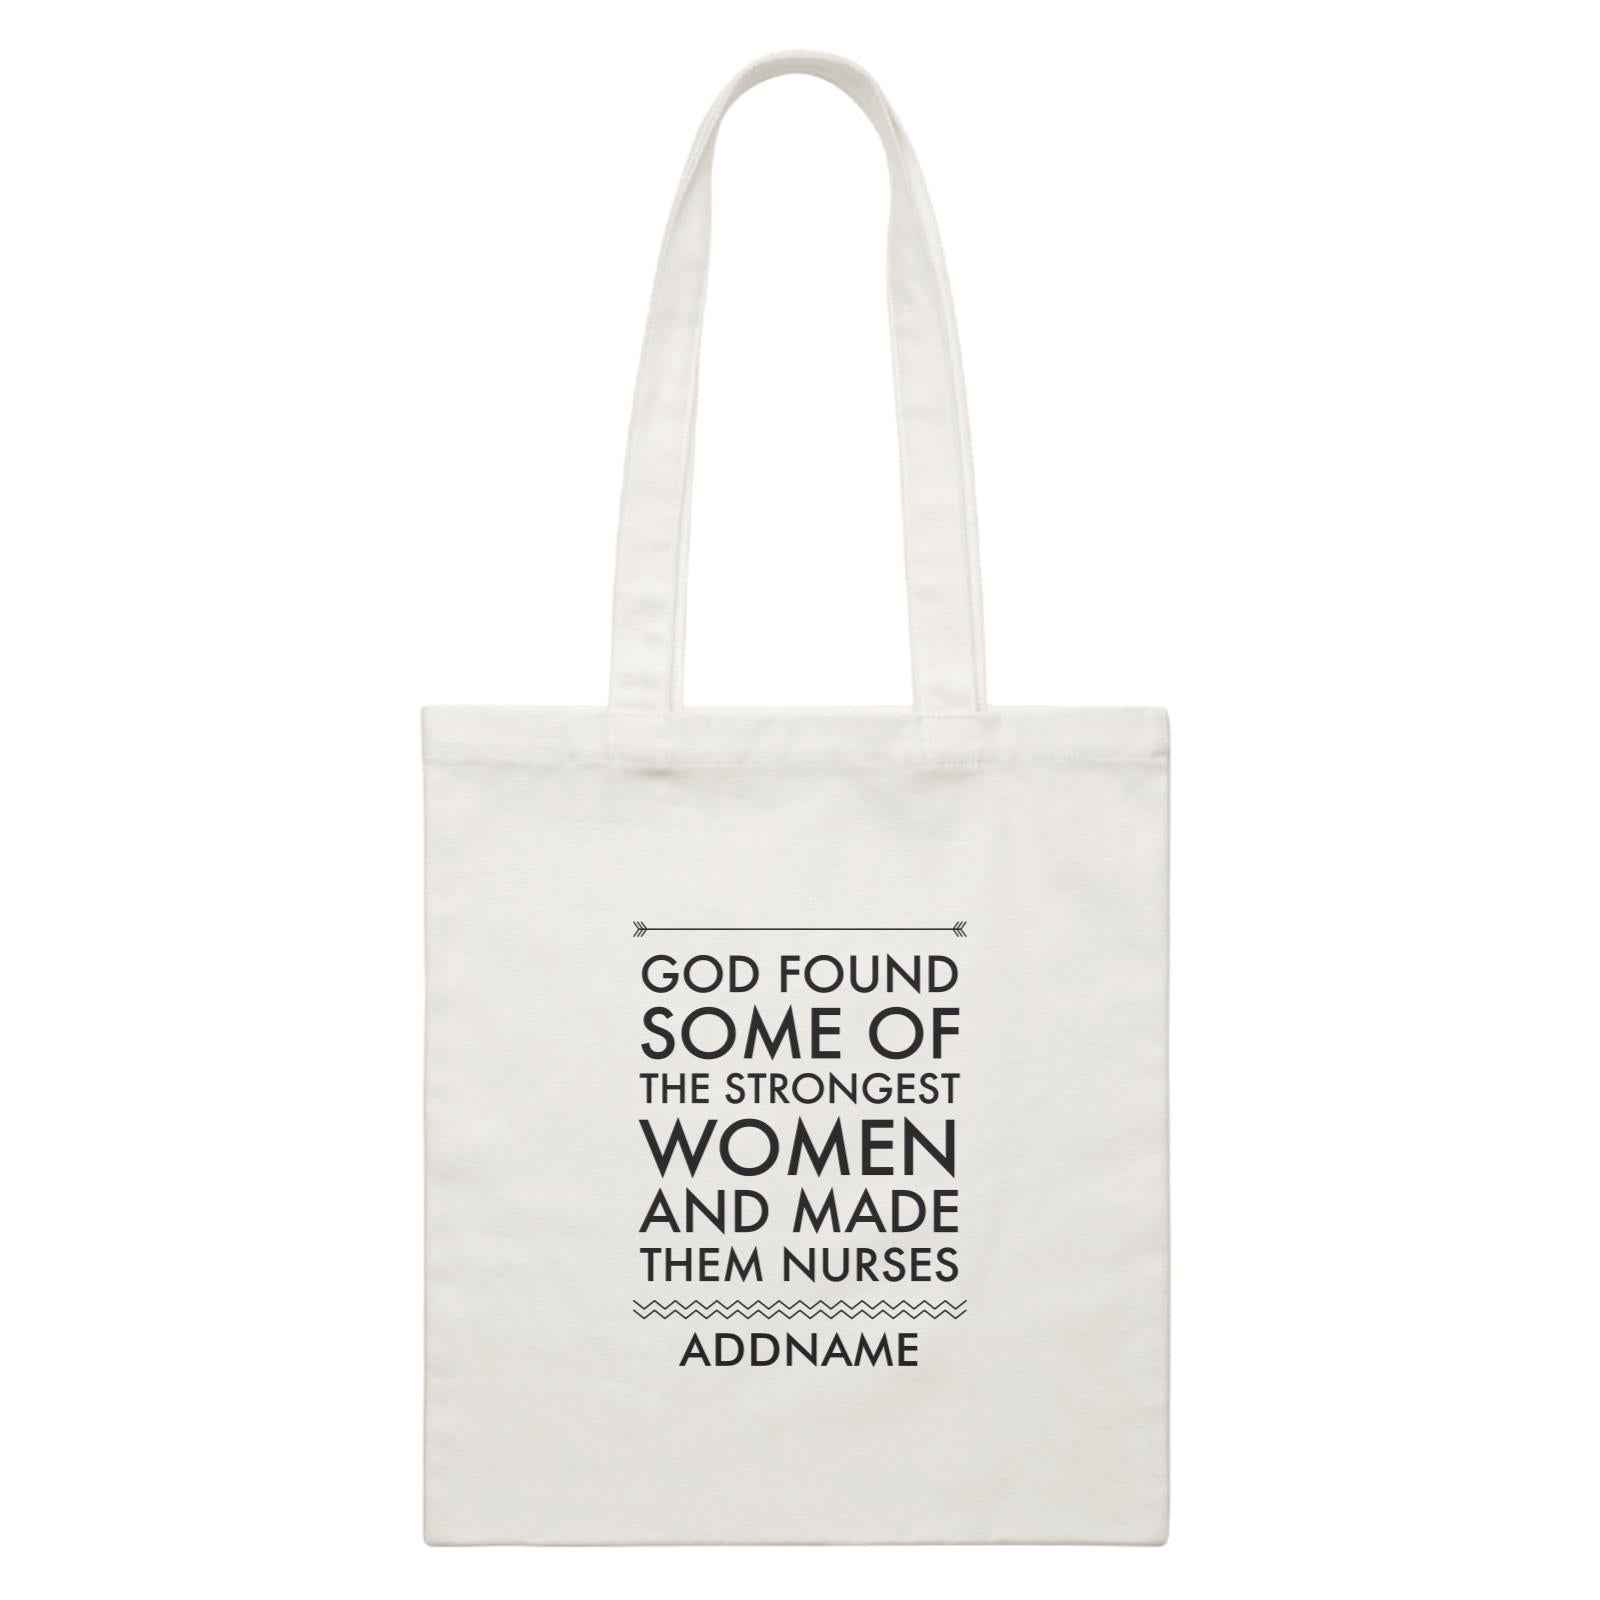 Nurse Quotes God Found Some Of The Strongest Woman And Made Them Nurses Addname White Canvas Bag